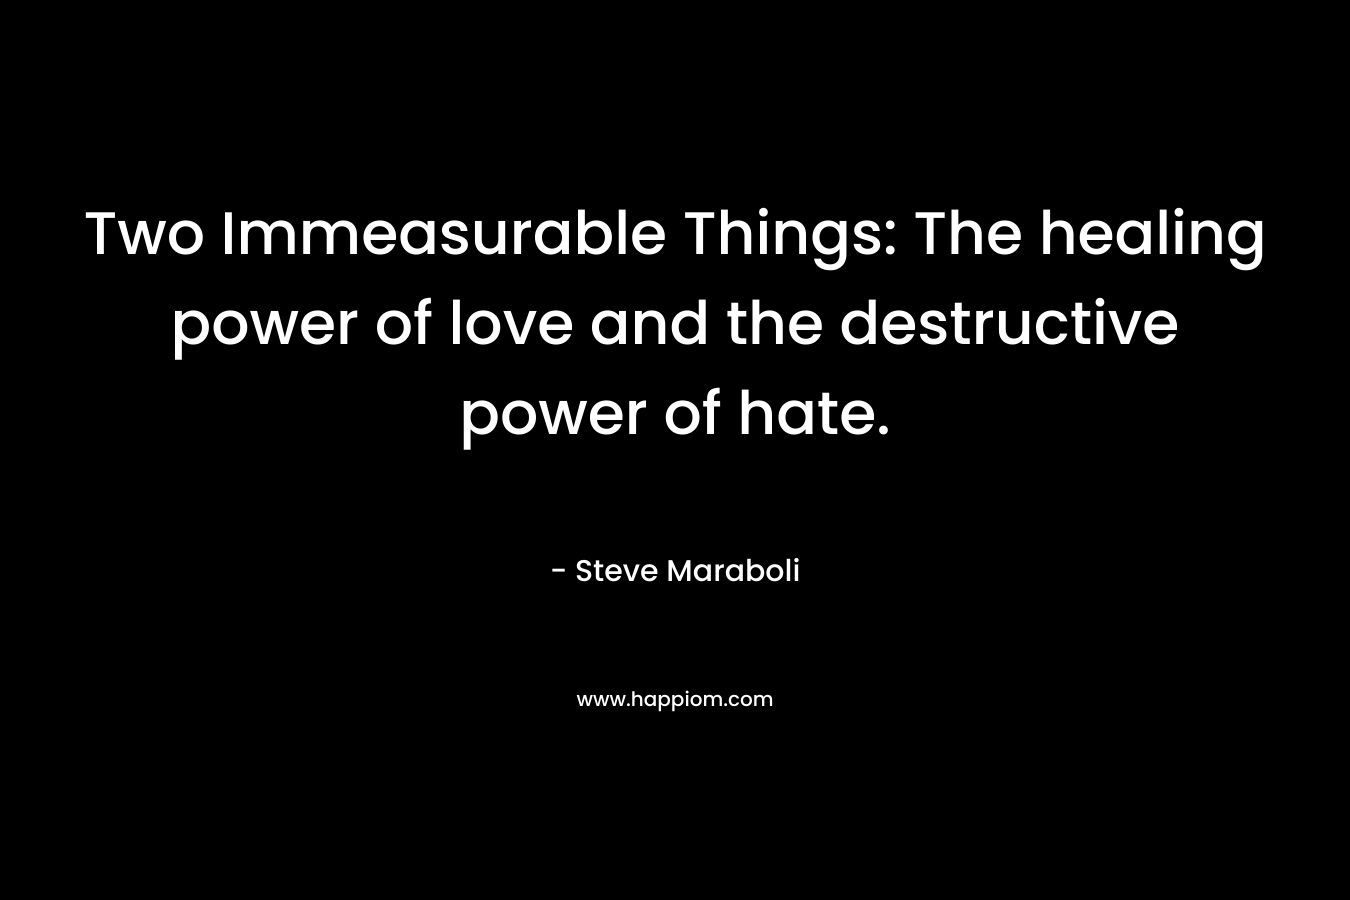 Two Immeasurable Things: The healing power of love and the destructive power of hate.